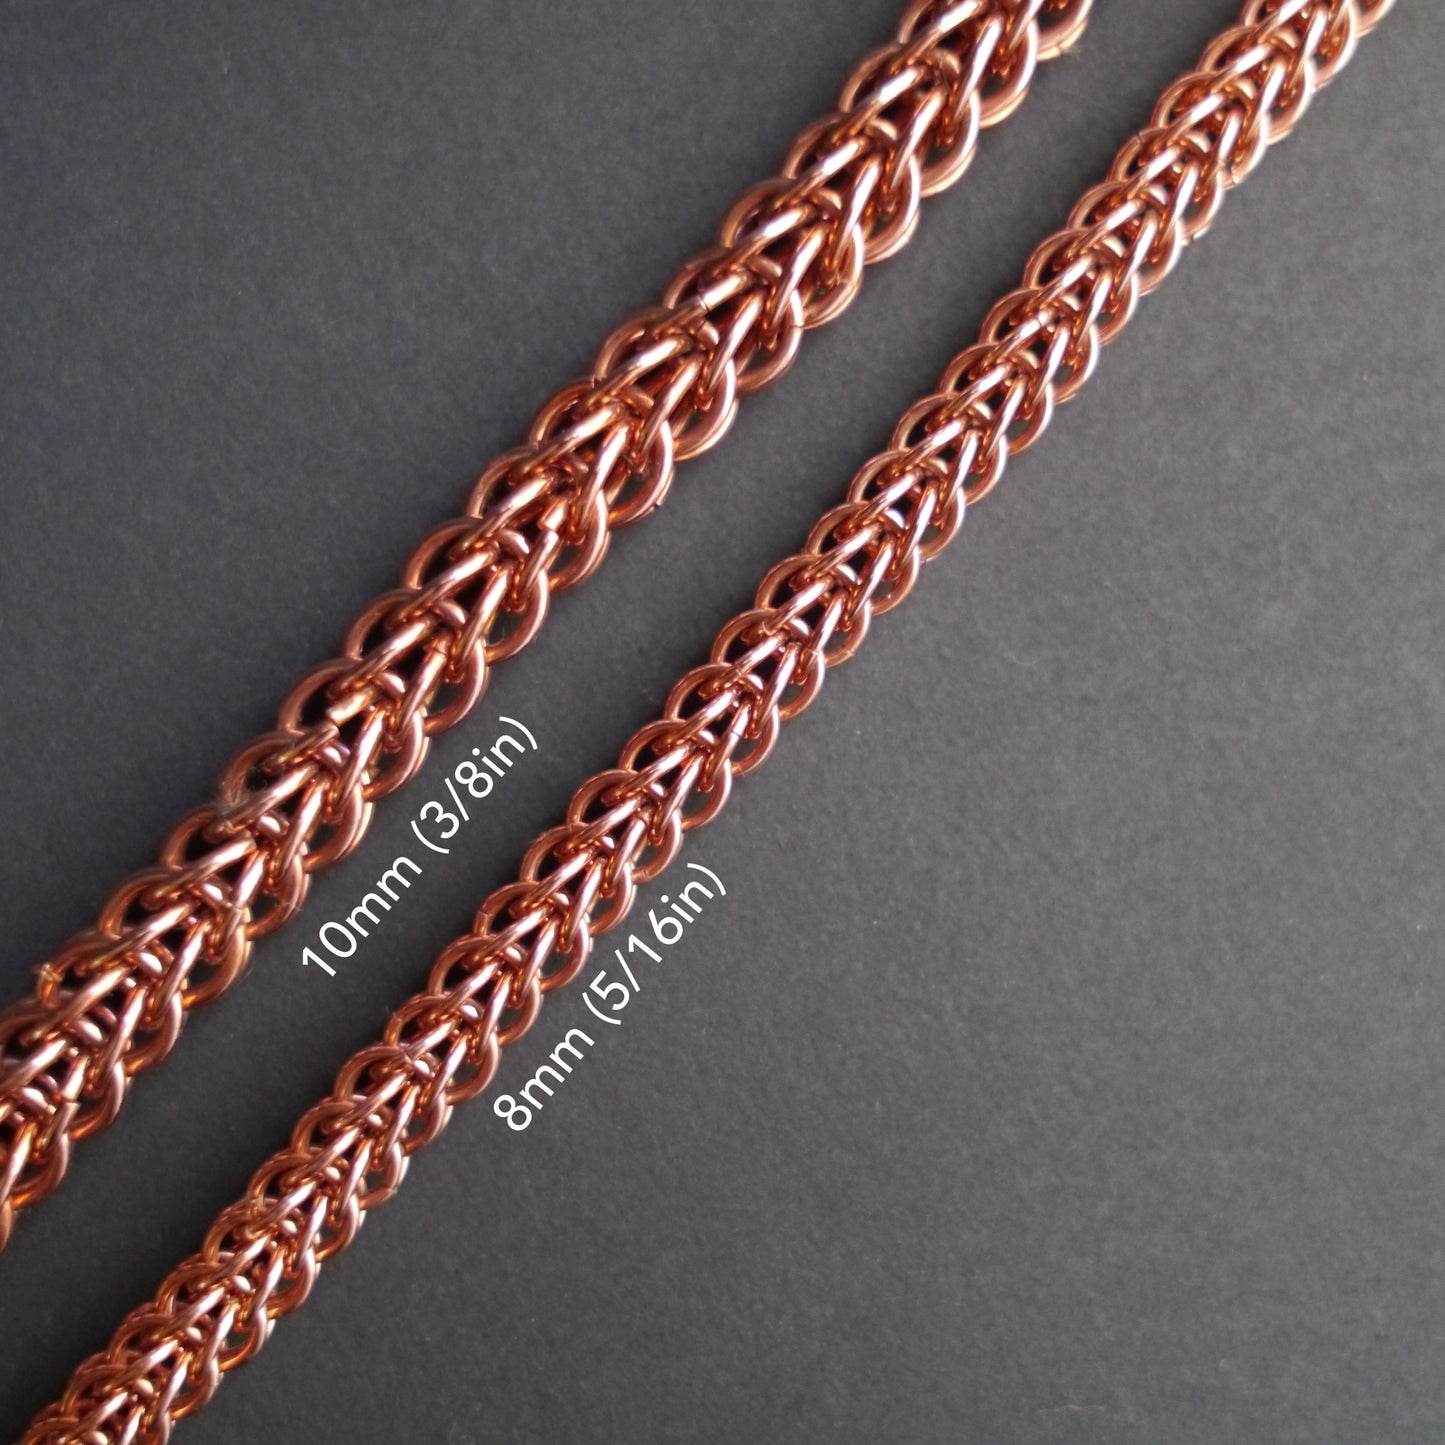 10mm Full Persian Chainmaille Bracelet in Copper